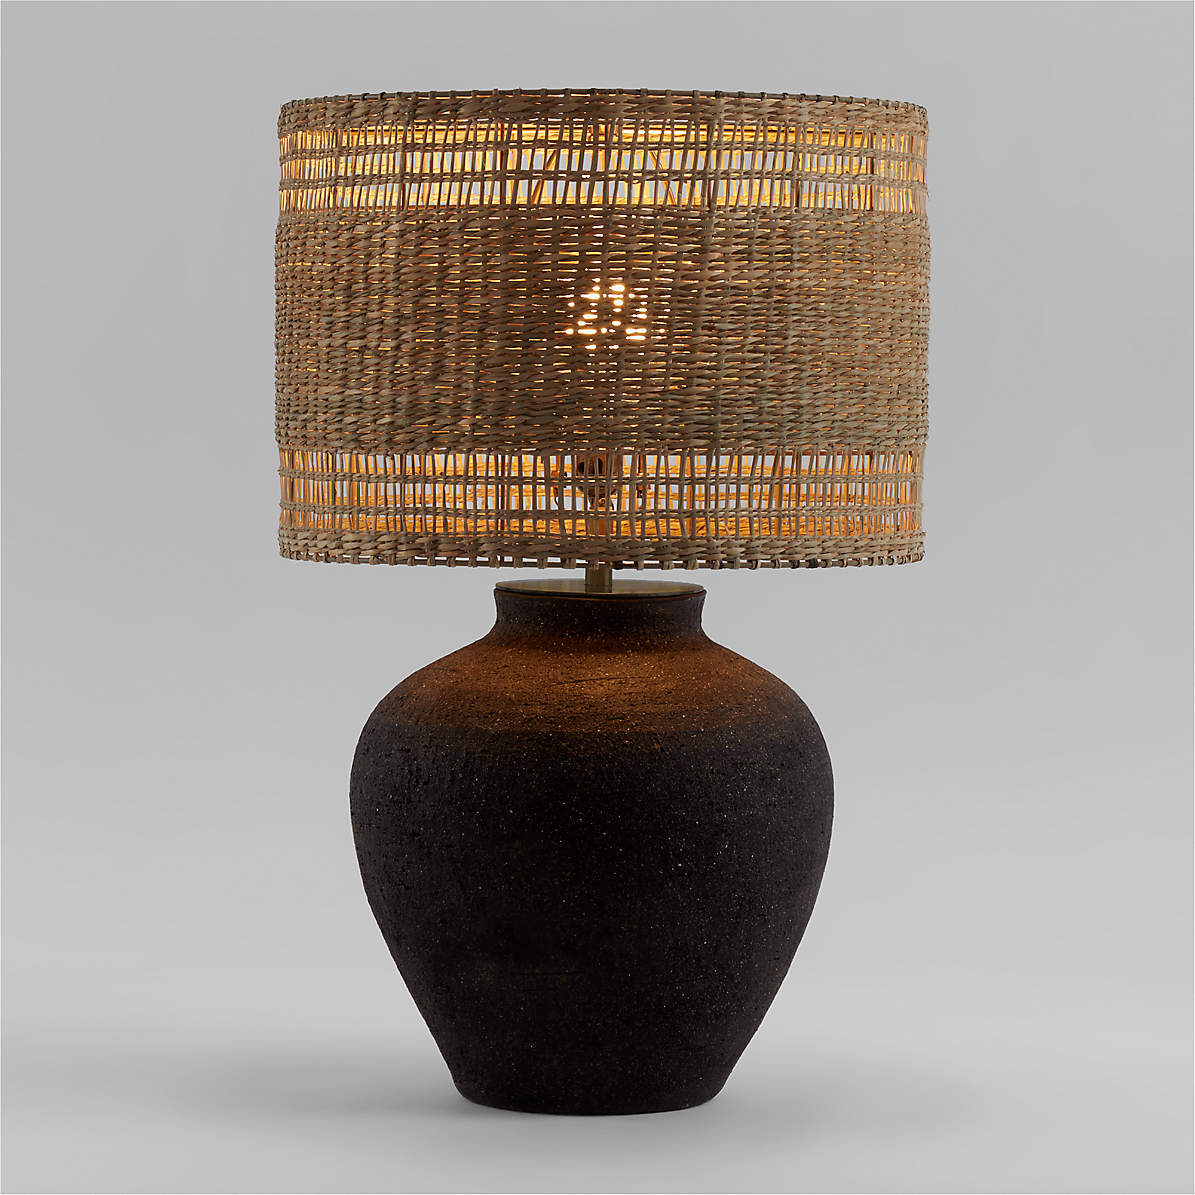 https://cb.scene7.com/is/image/Crate/CorfuGryTblLmpWvnNatShdROS22/$web_pdp_main_carousel_zoom_med$/220915151347/corfu-black-table-lamp-with-woven-natural-shade.jpg